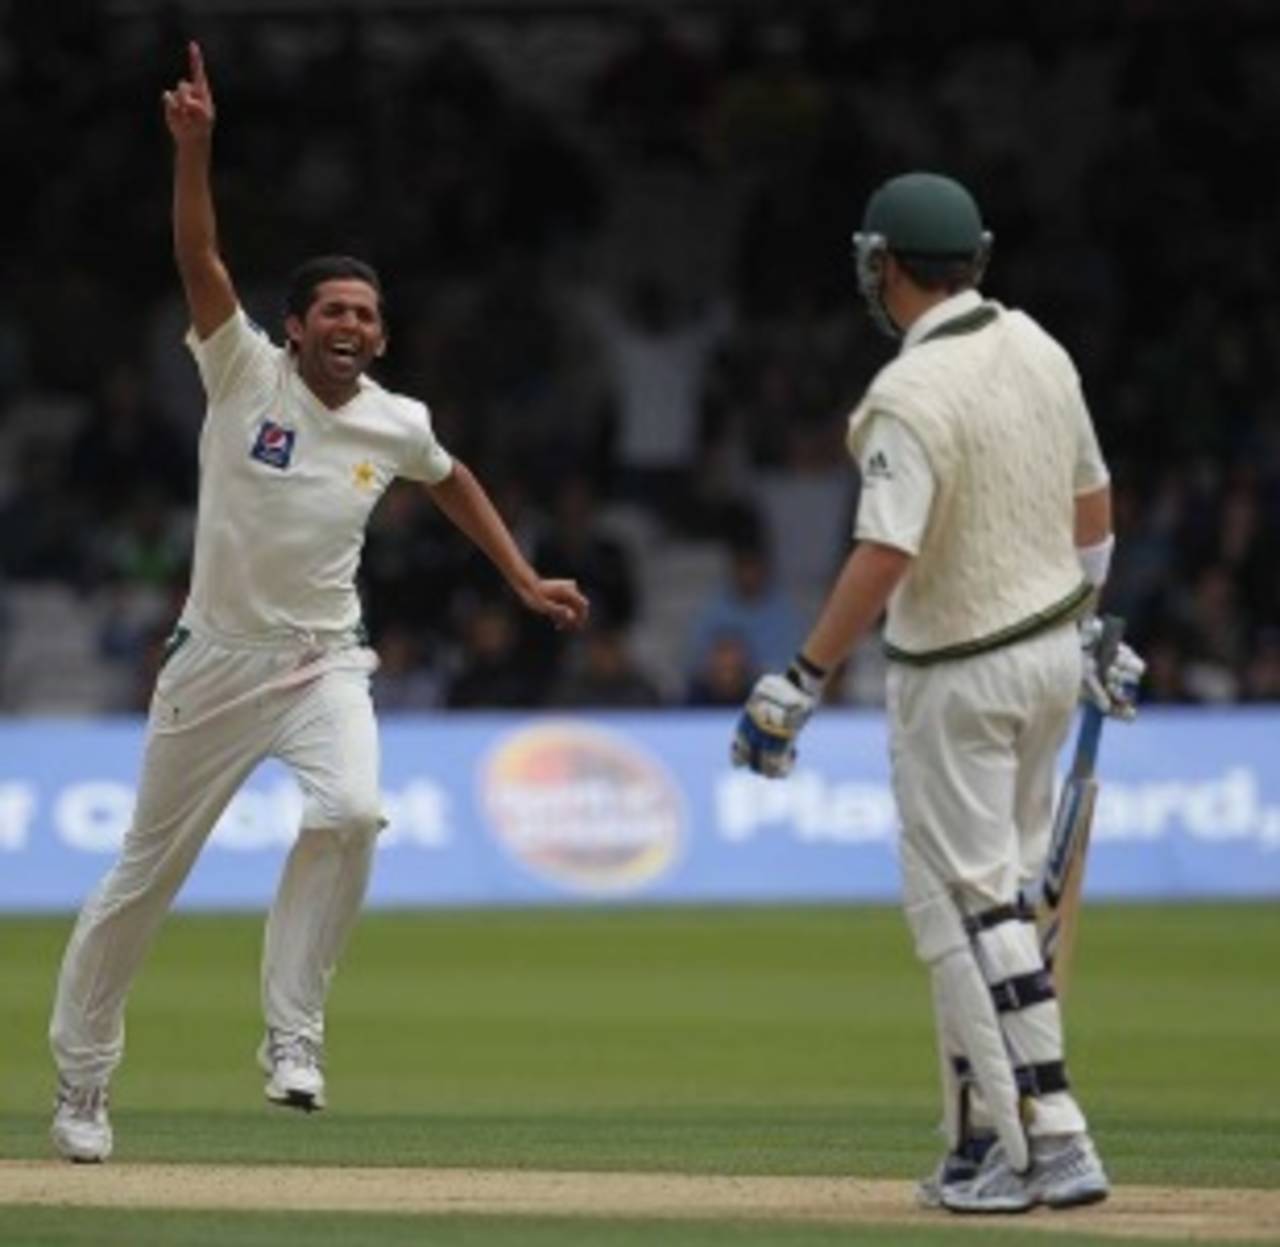 Mohammad Asif found Marcus North's outside edge to give Pakistan hope, Pakistan v Australia, 1st Test, Lord's, July 15, 2010